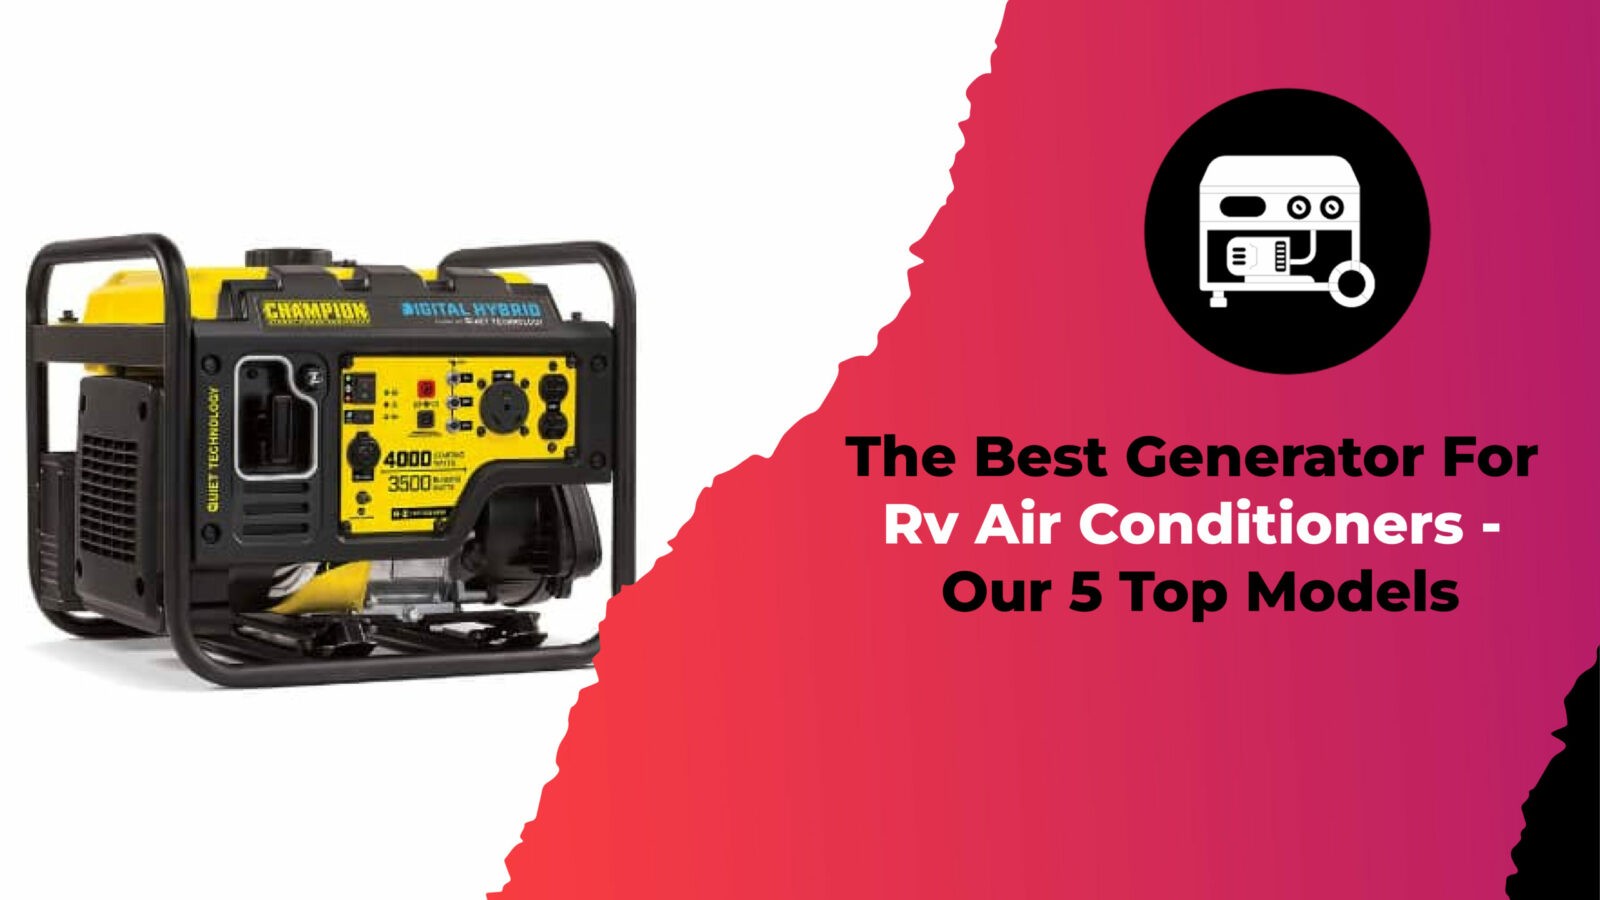 The Best Generator For Rv Air Conditioners - Our 5 Top Models